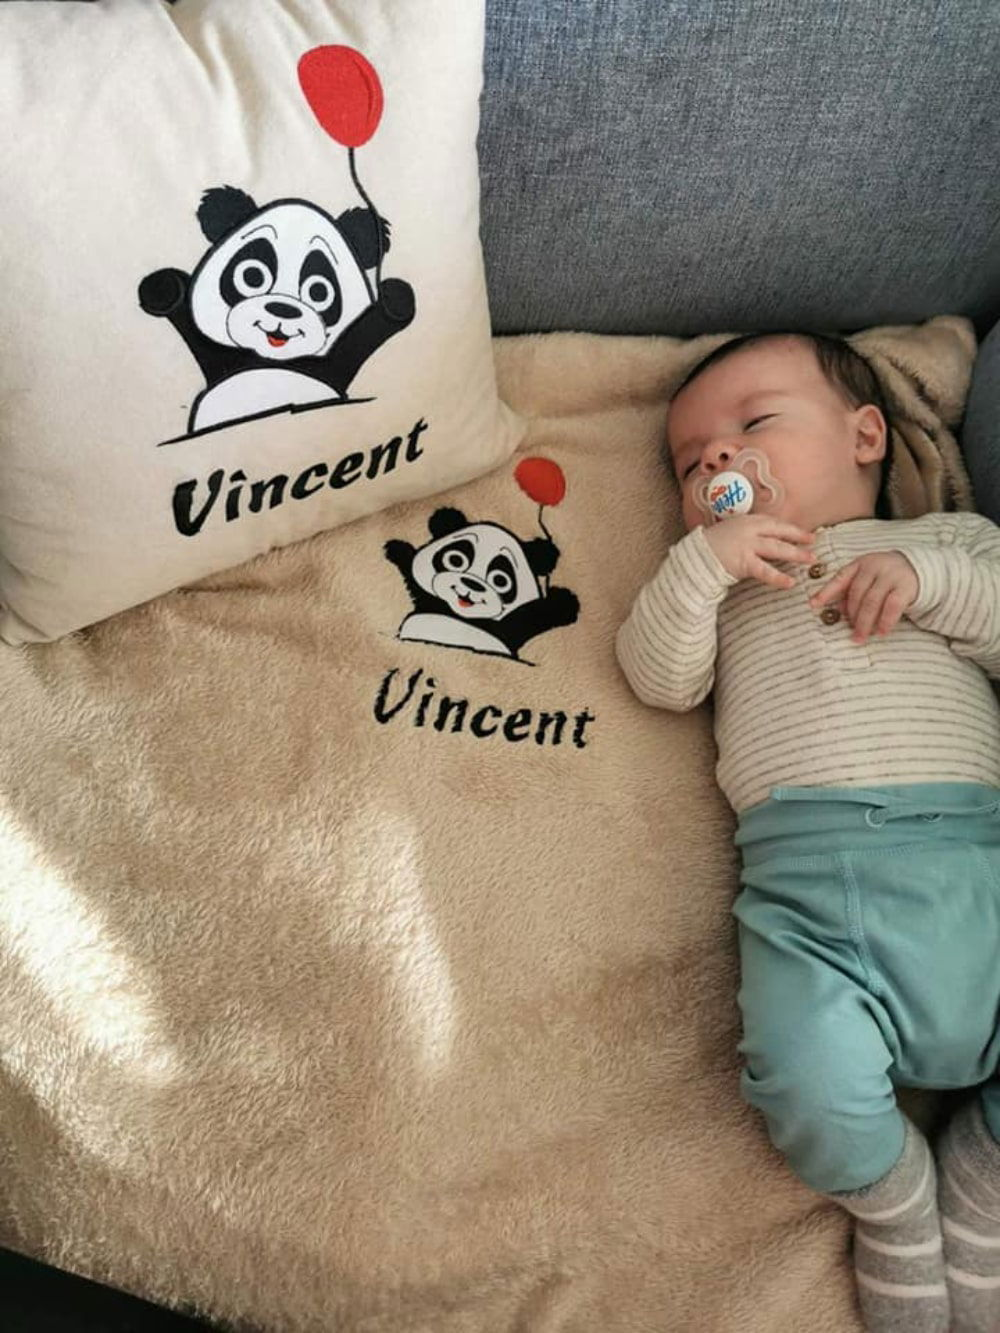 Adorable baby boy rests peacefully on his bed, snuggled up with a soft and cozy personalized pillow and blanket, customized with his name and a charming design.